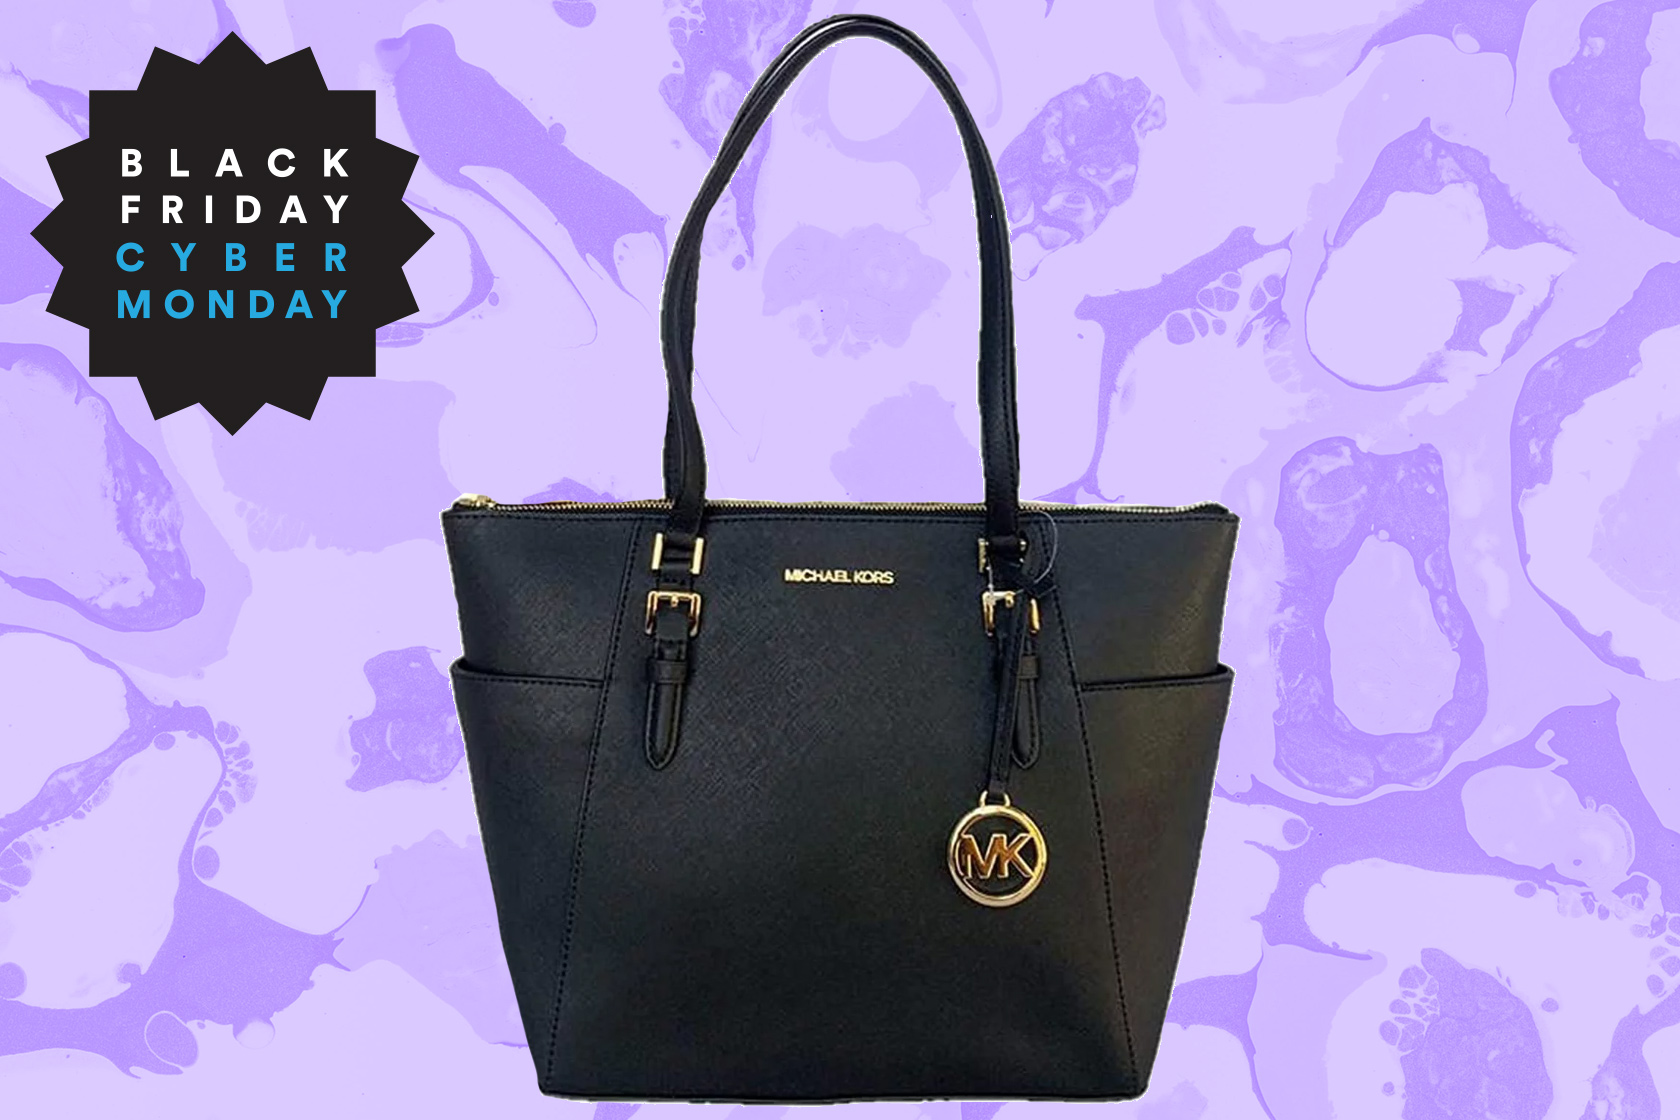 You can get a Michael Kors black purse for only $110 at Walmart